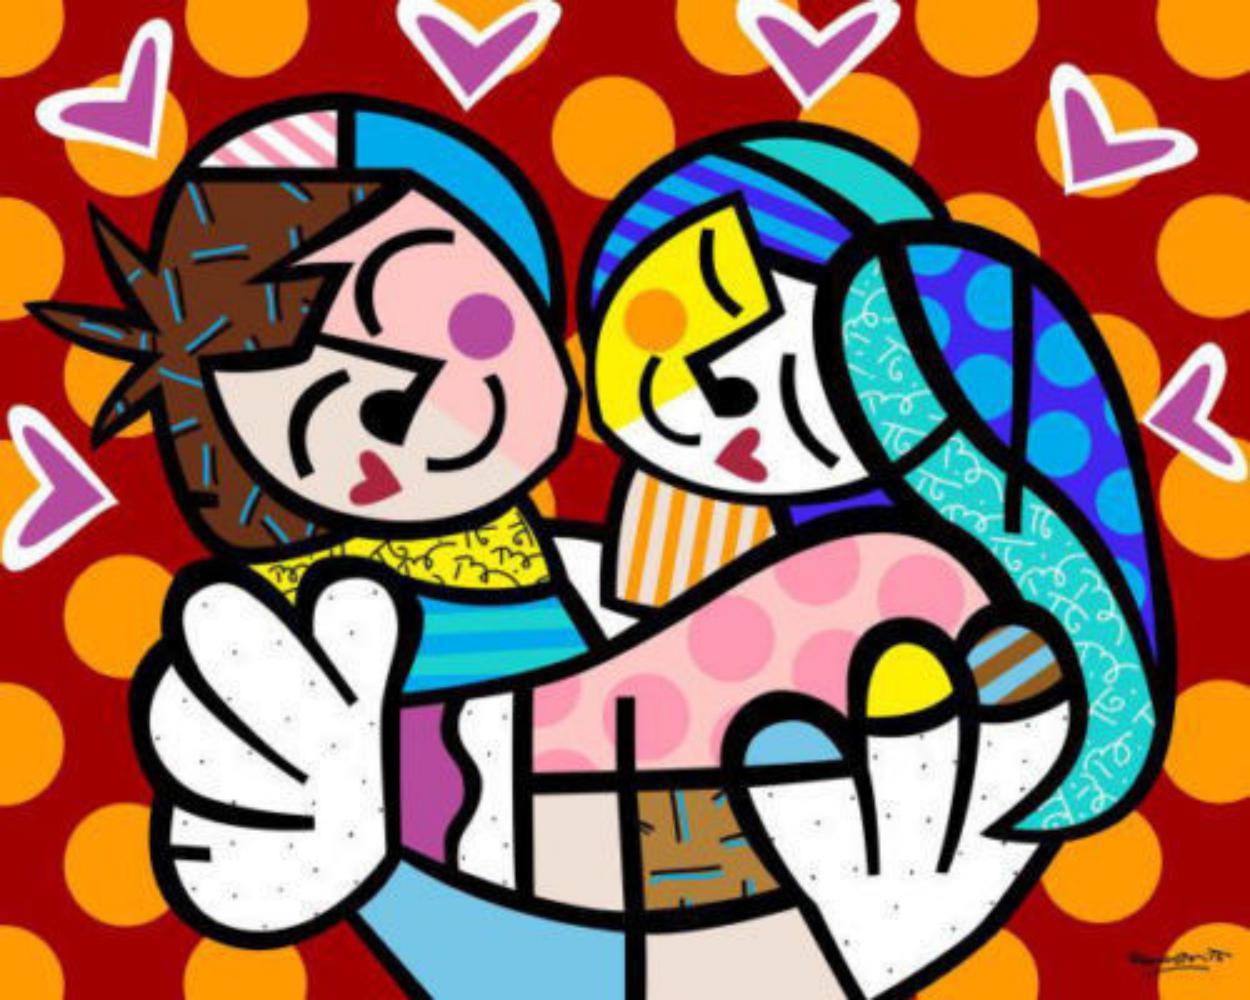 Embrace by Romero Britto offset lithograph unframed